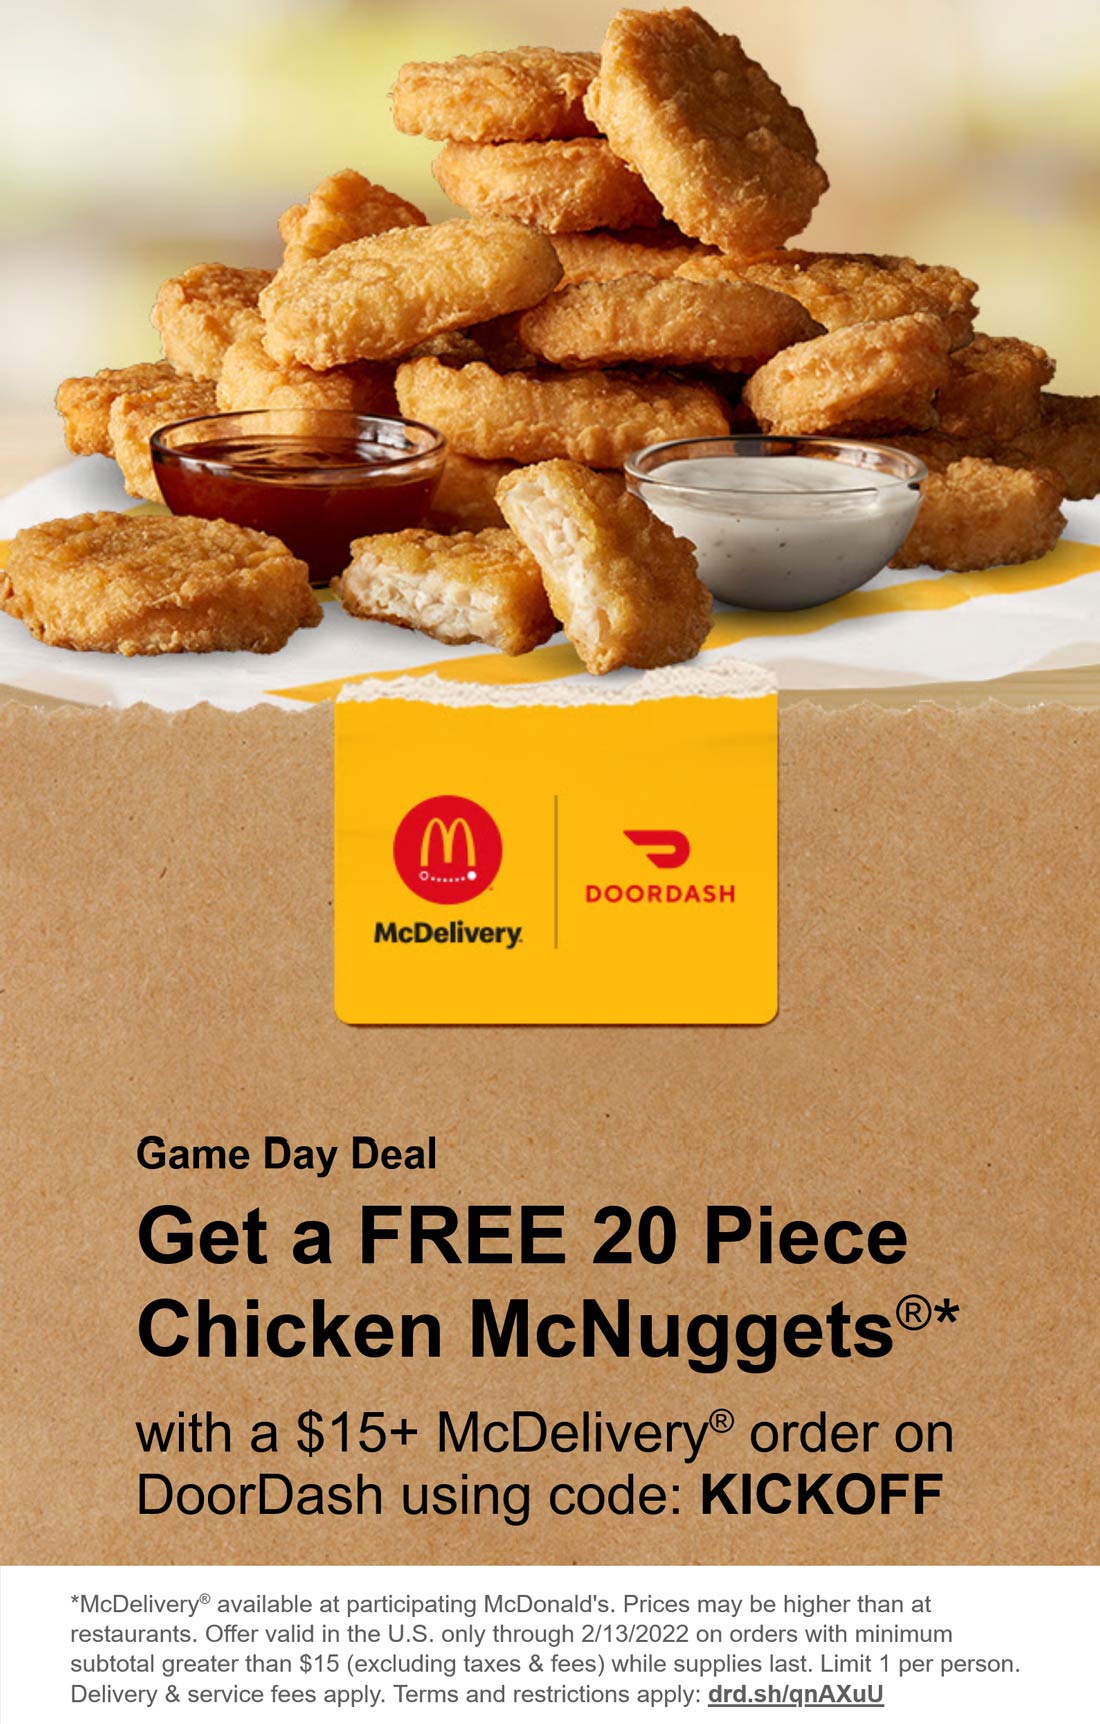 McDonalds restaurants Coupon  Free 20pc chicken mcnuggets on $15 delivery Sunday at McDonalds via promo code KICKOFF #mcdonalds 